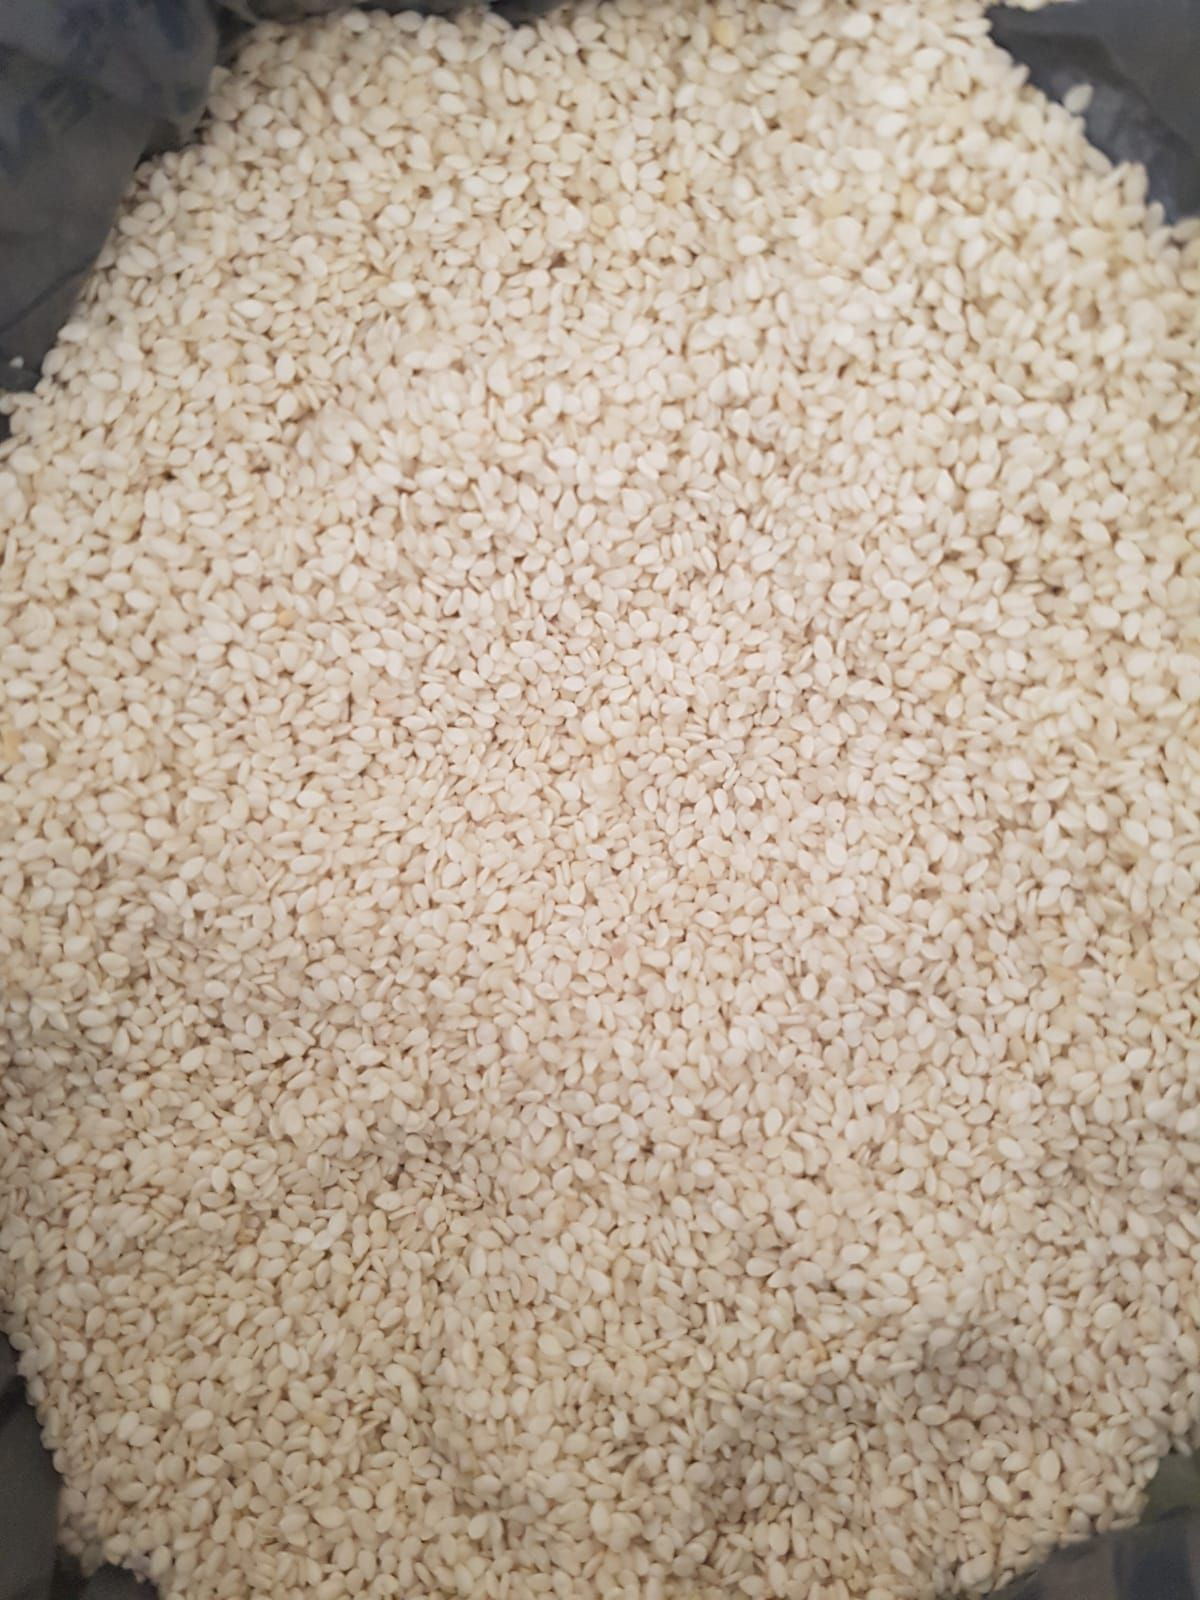 99.99 % Purity Natural White Sesame Seeds